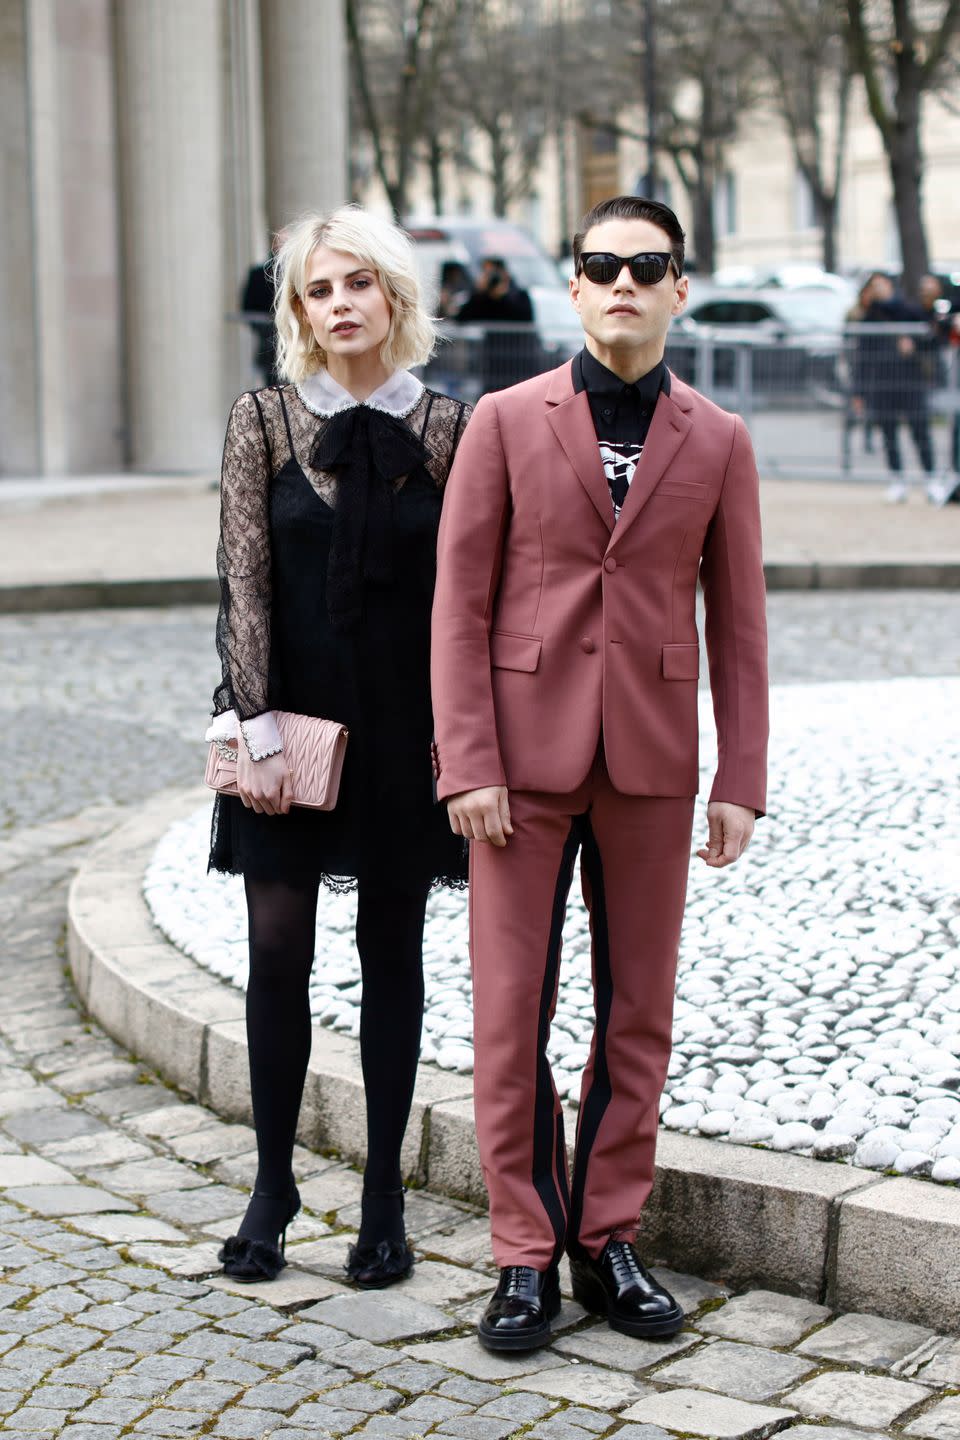 <p>The couple attended the Miu Miu AW19 Paris Fashion Week show in March 2018, with Boynton wearing a black lace dress by the designer and Malek in a dusty pink suit.</p>